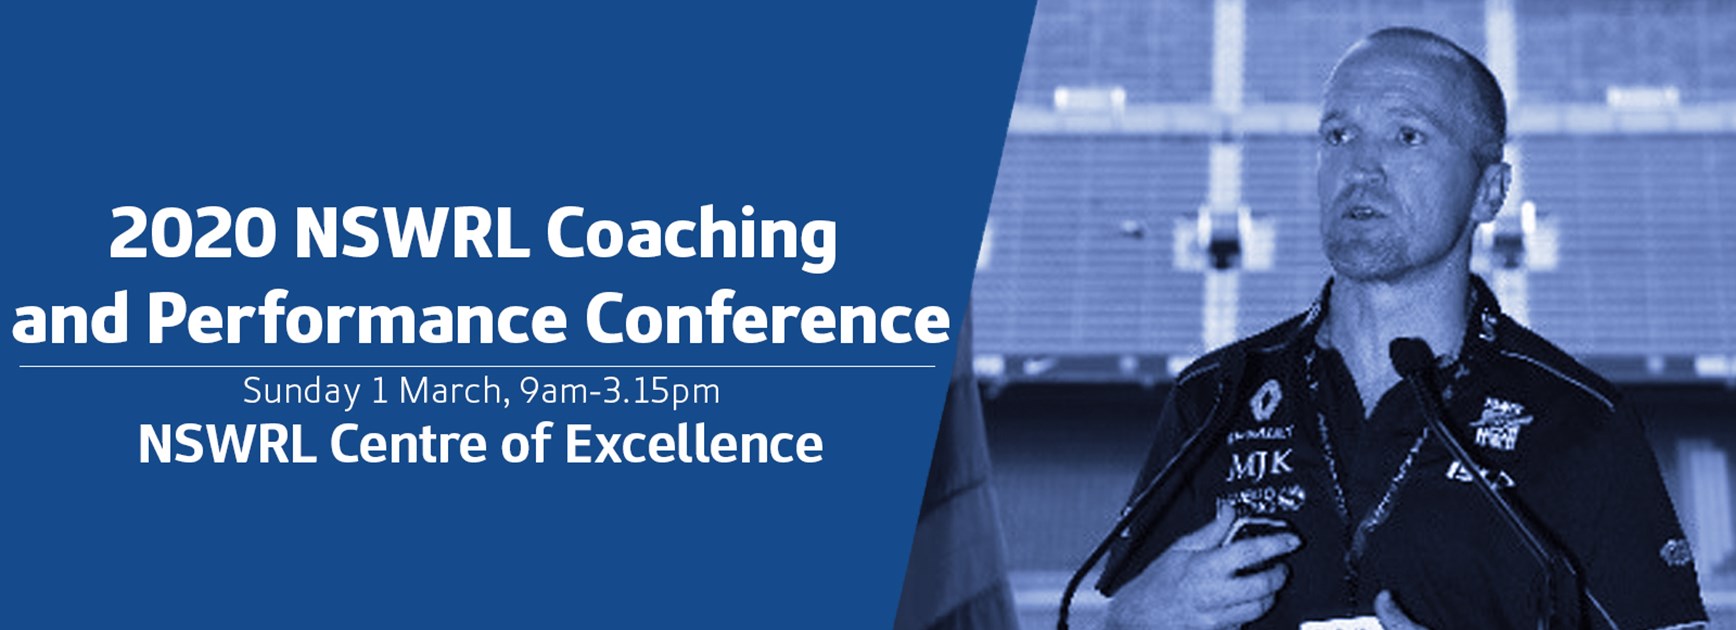 Dr Darren Burgess to lead NSWRL Coaching Conference